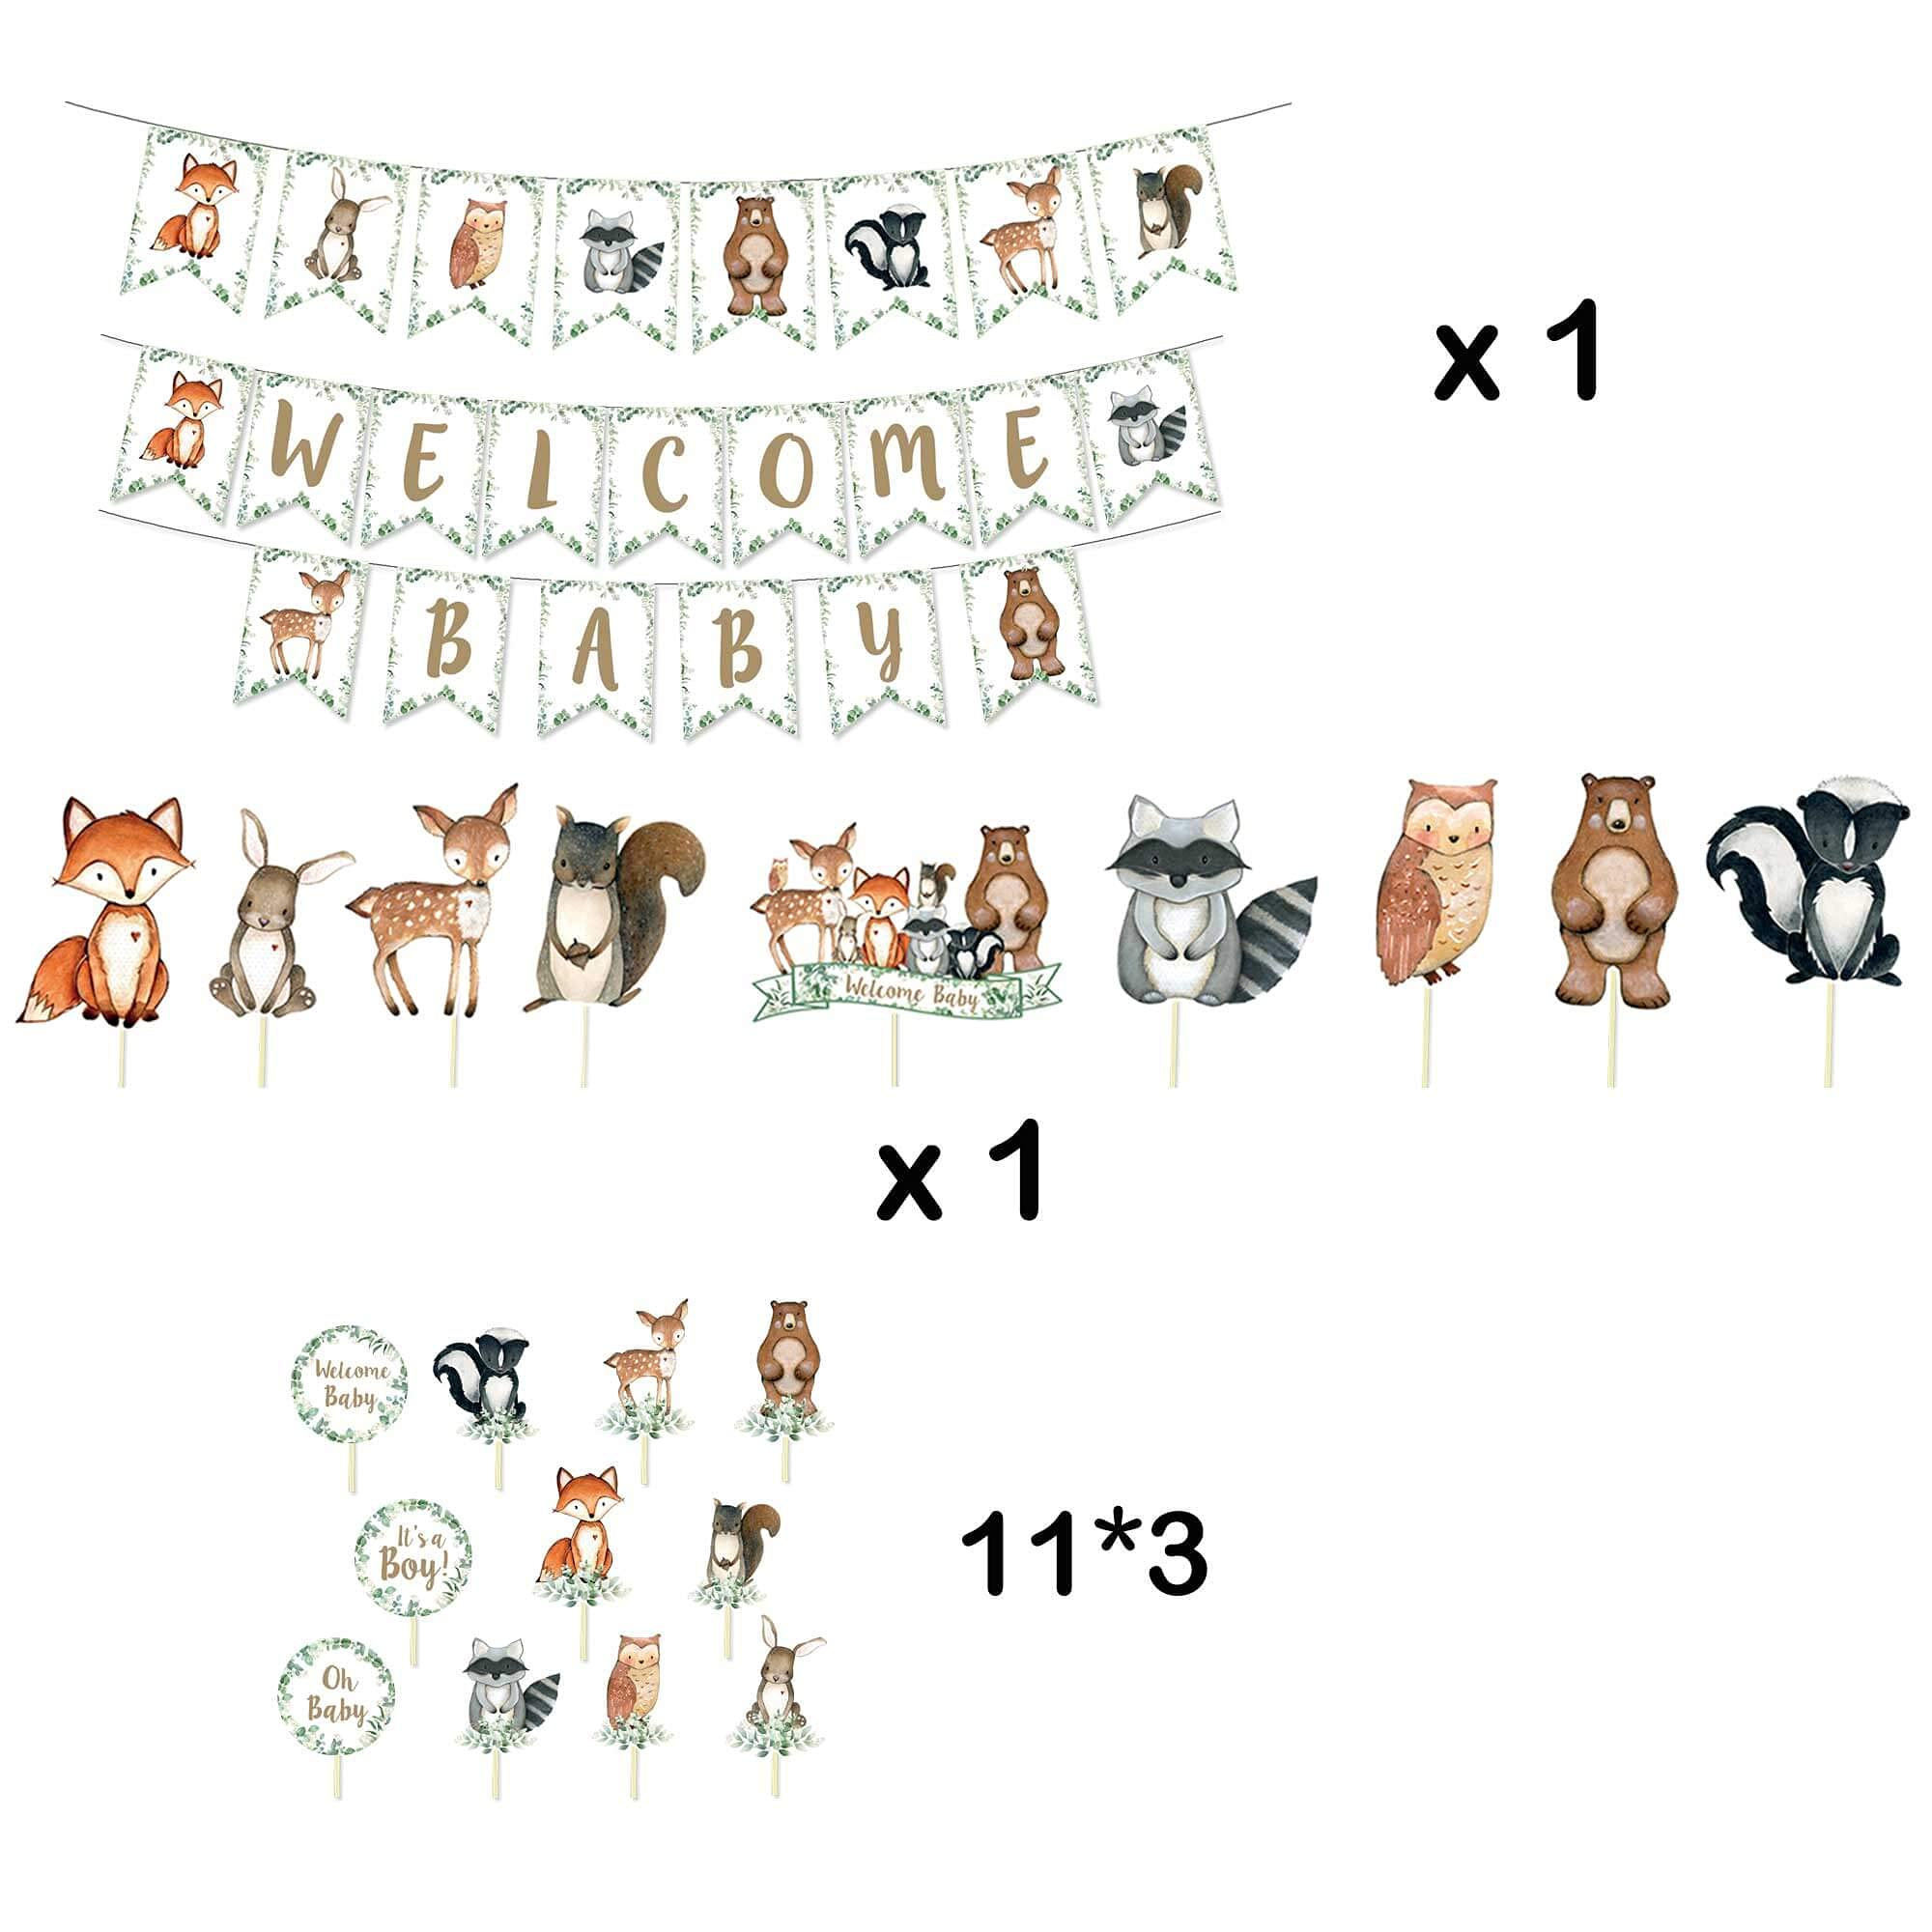 HEETON Woodland Baby Shower Party Supplies Decorations Fox Balloon Oh Baby Woodland Welcome Baby Banner Creatures Fawn Animal Friends Garland Backdrop Cake Cupcake Topper for Girl Boy Gender Reveal